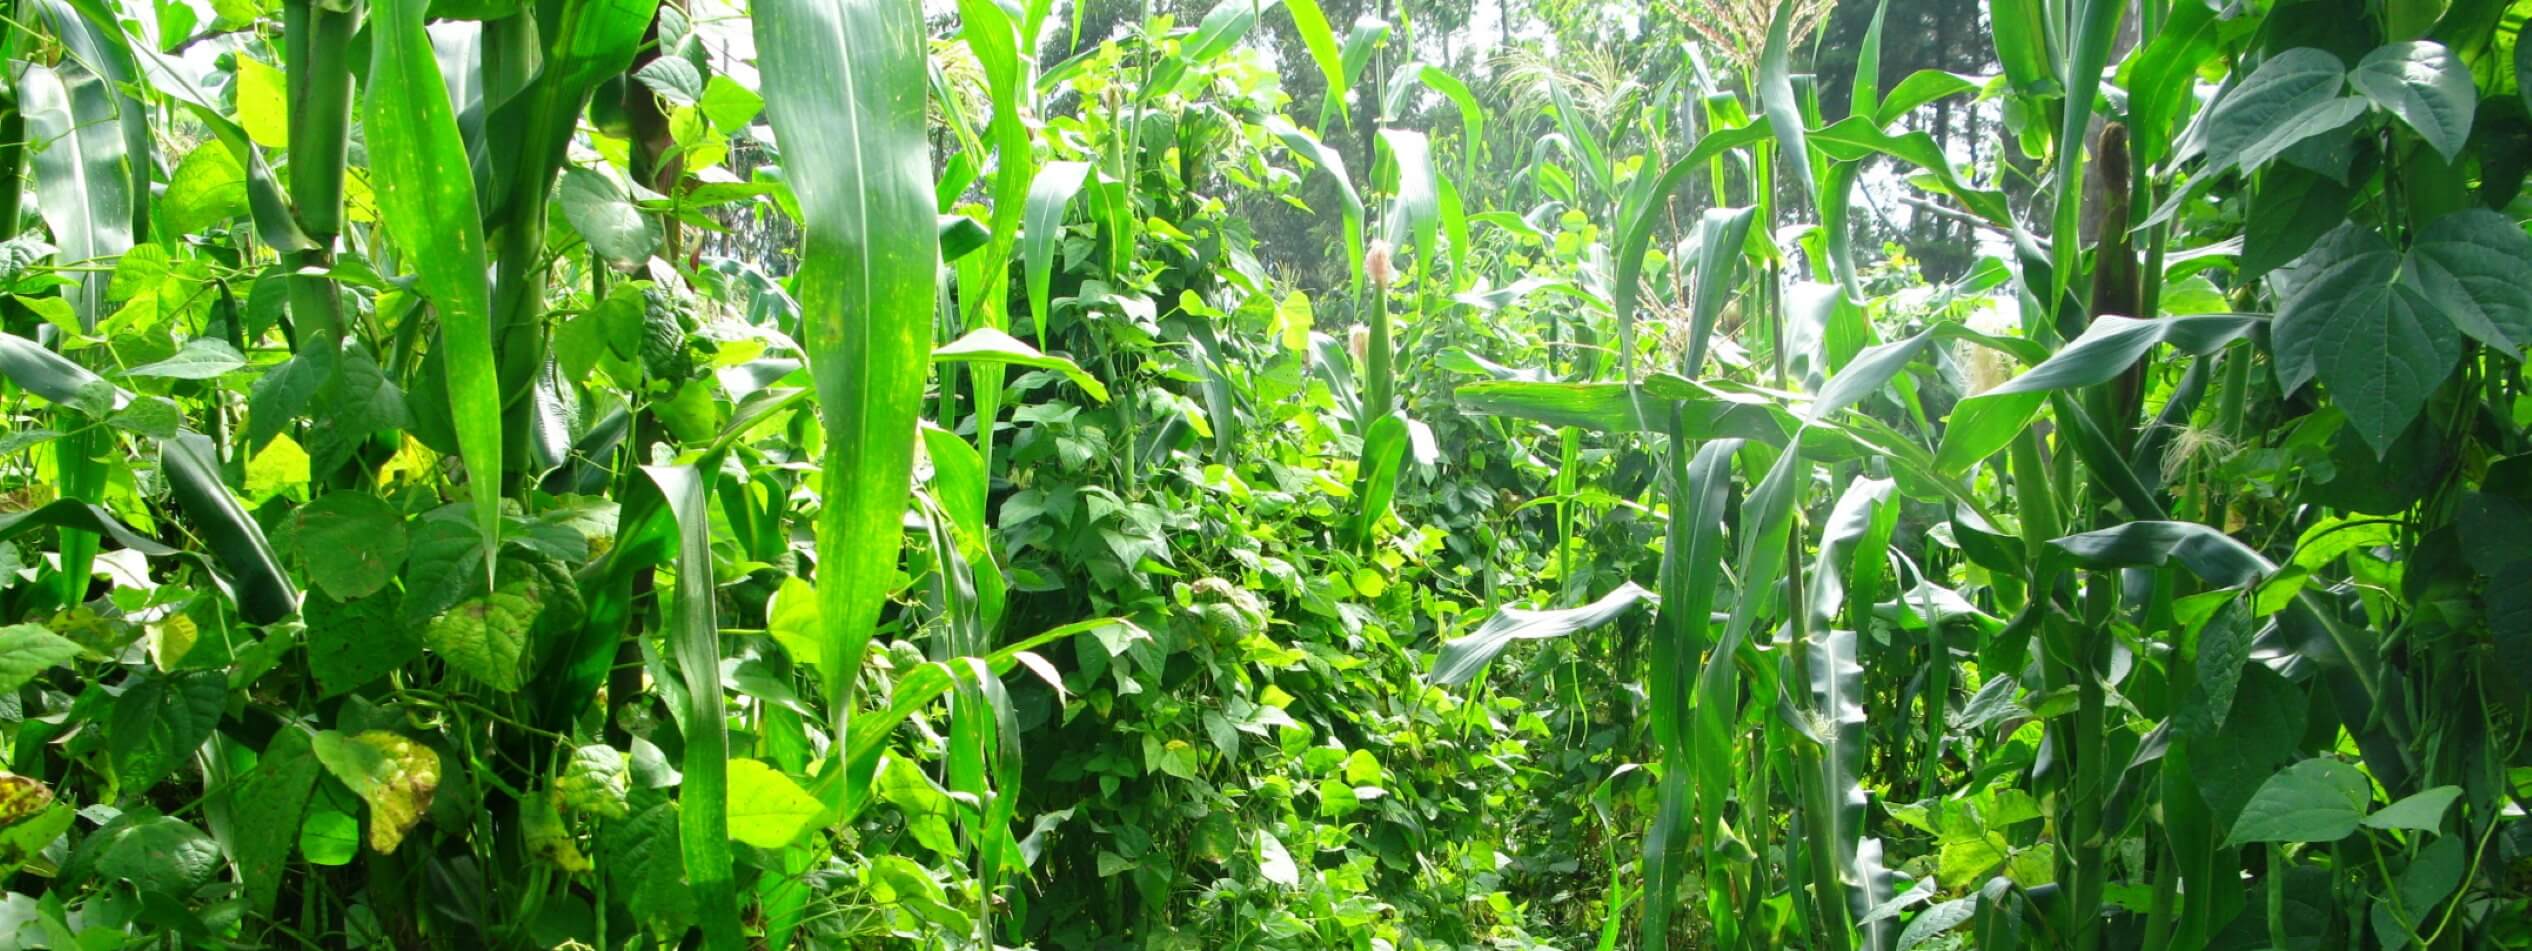 Intercropping maize and beans